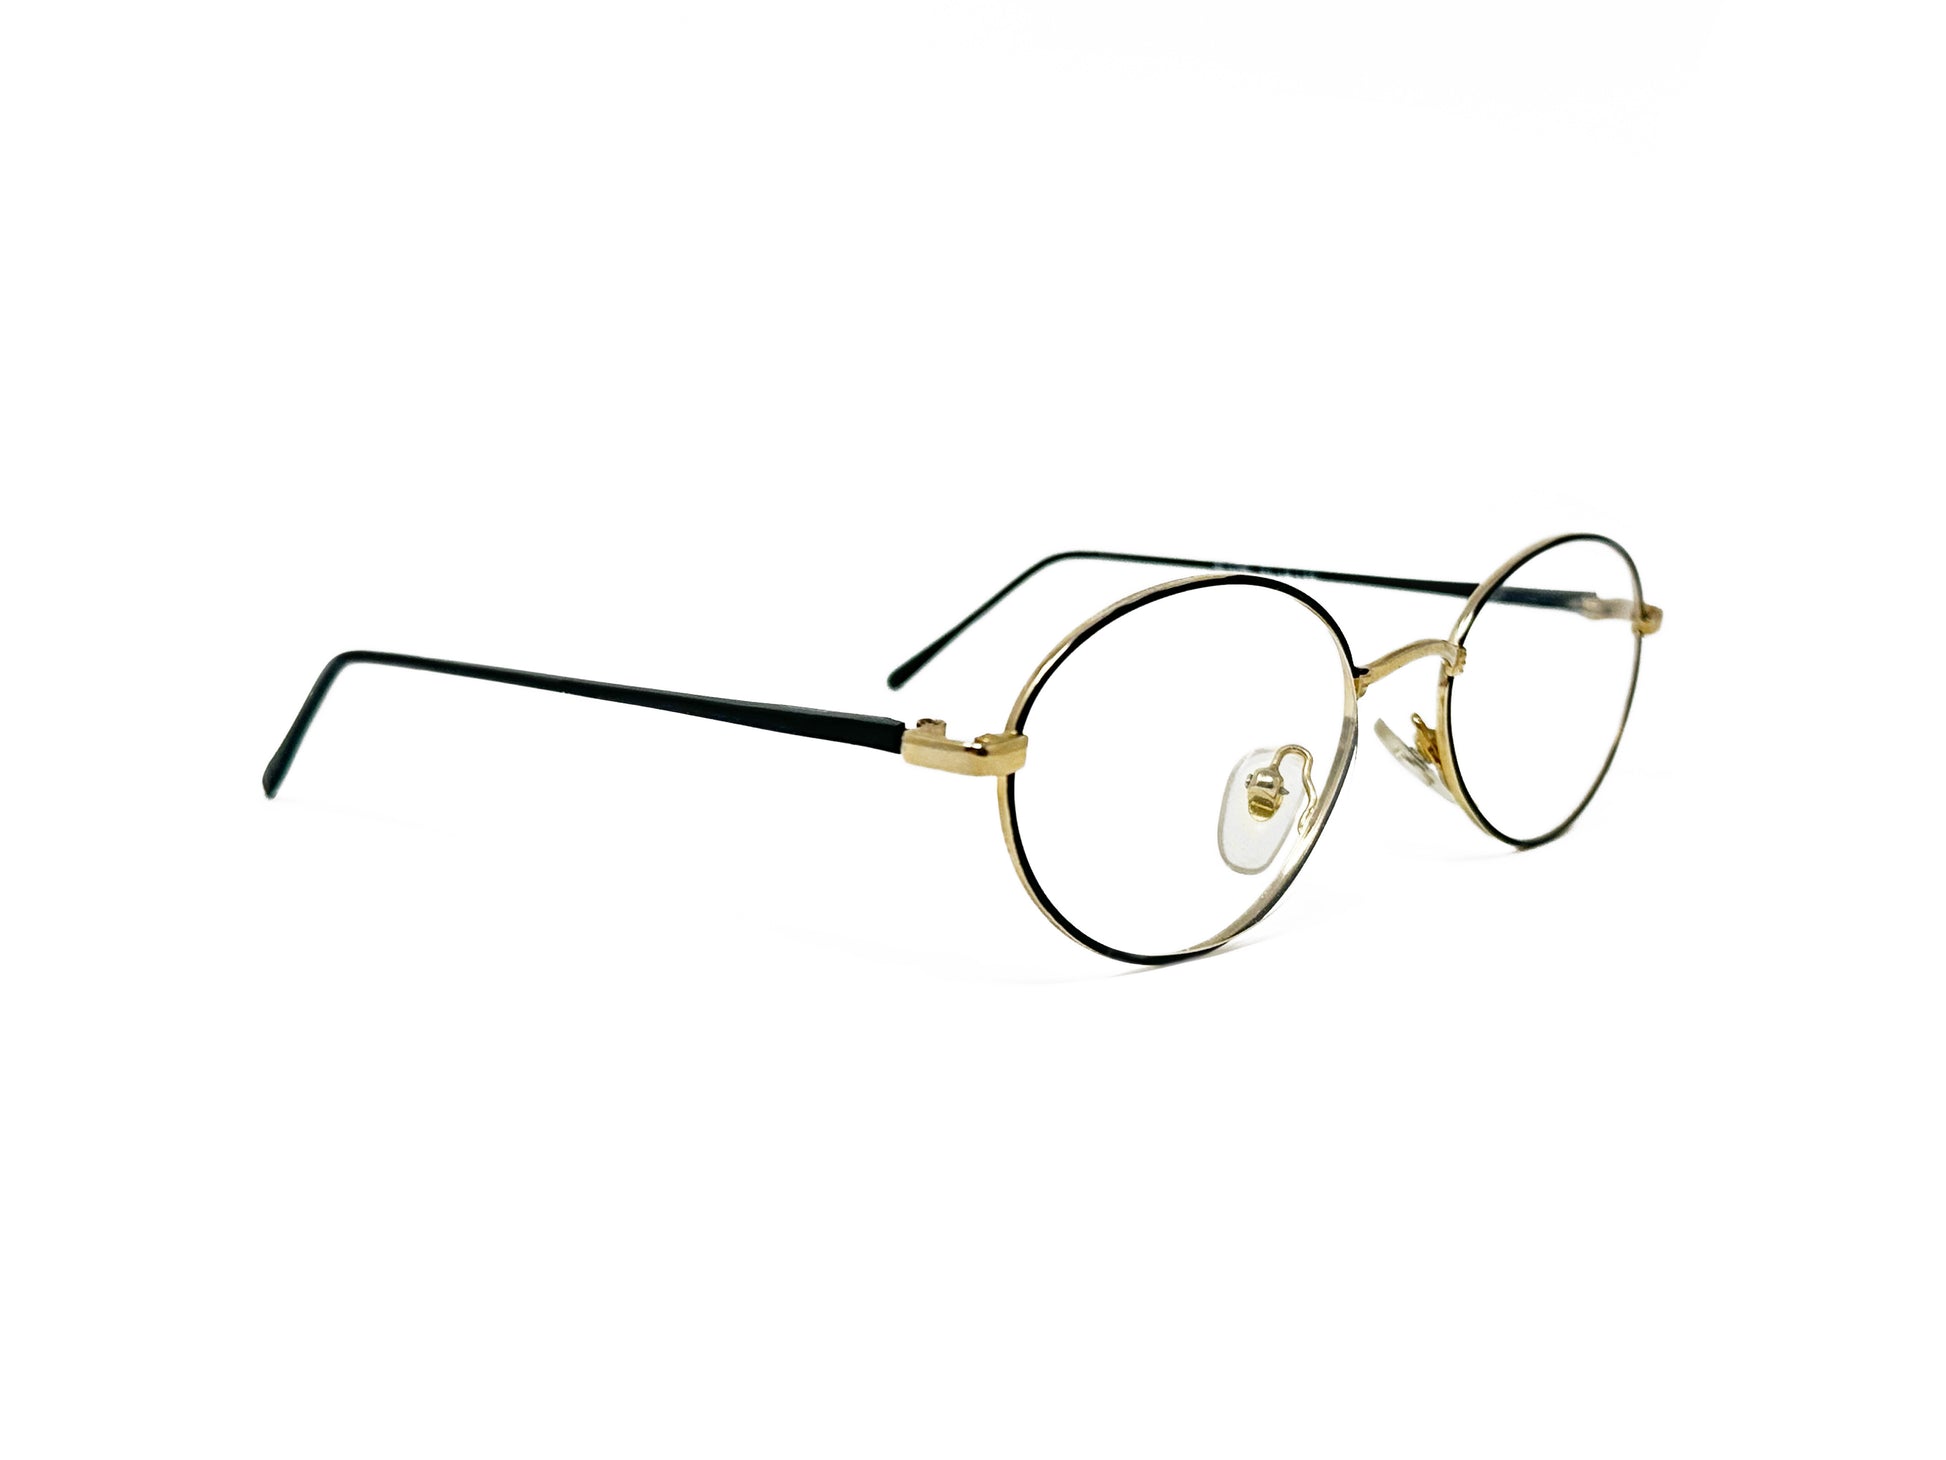 Coast thin, oval, optical frame. Model: 414. Color: Black with gold metal accents. Side view.